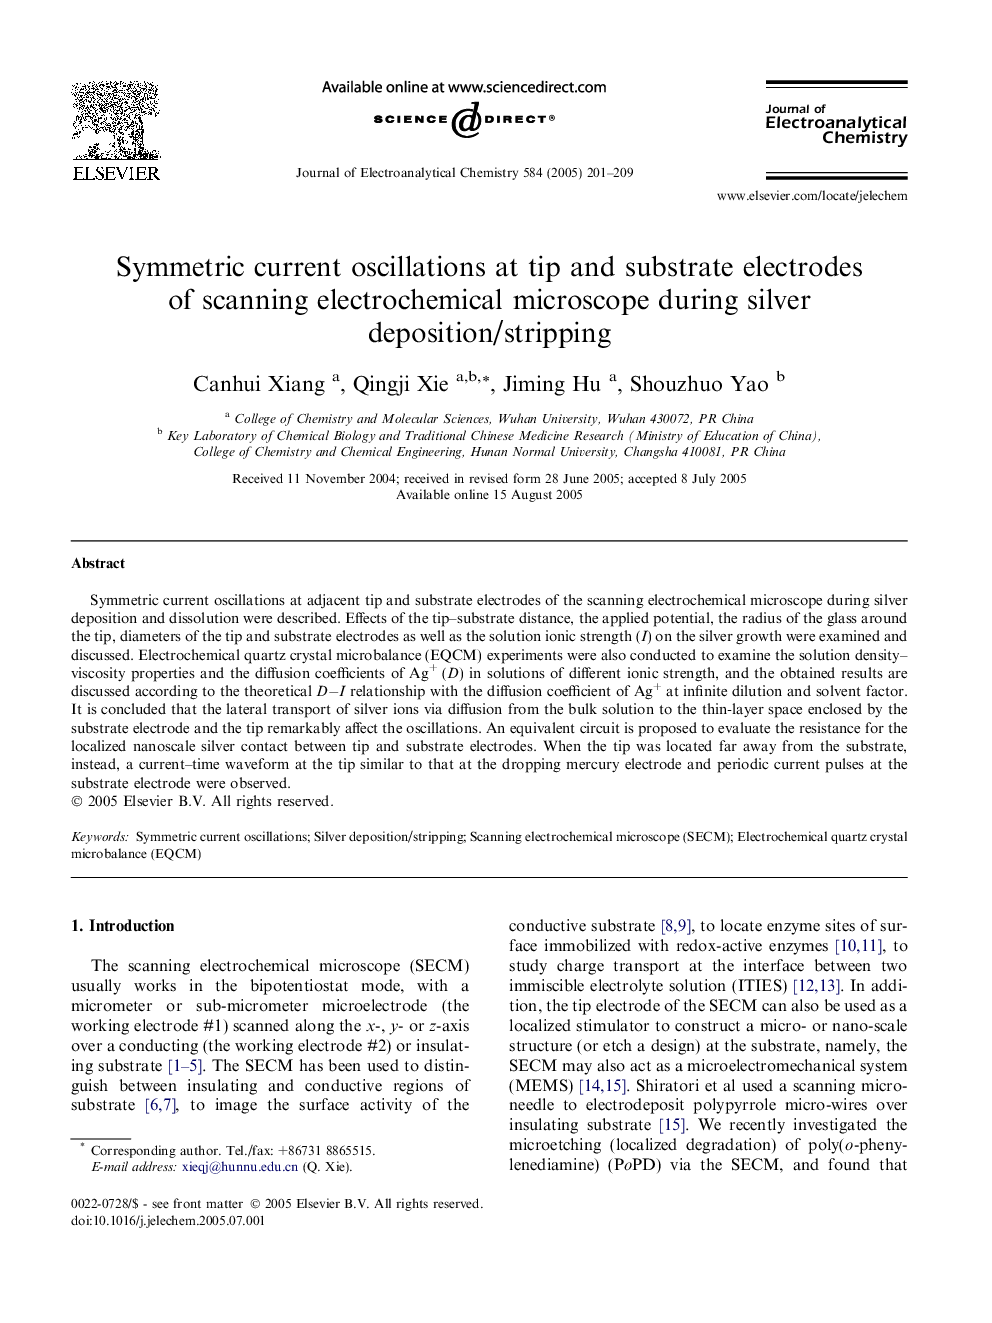 Symmetric current oscillations at tip and substrate electrodes of scanning electrochemical microscope during silver deposition/stripping